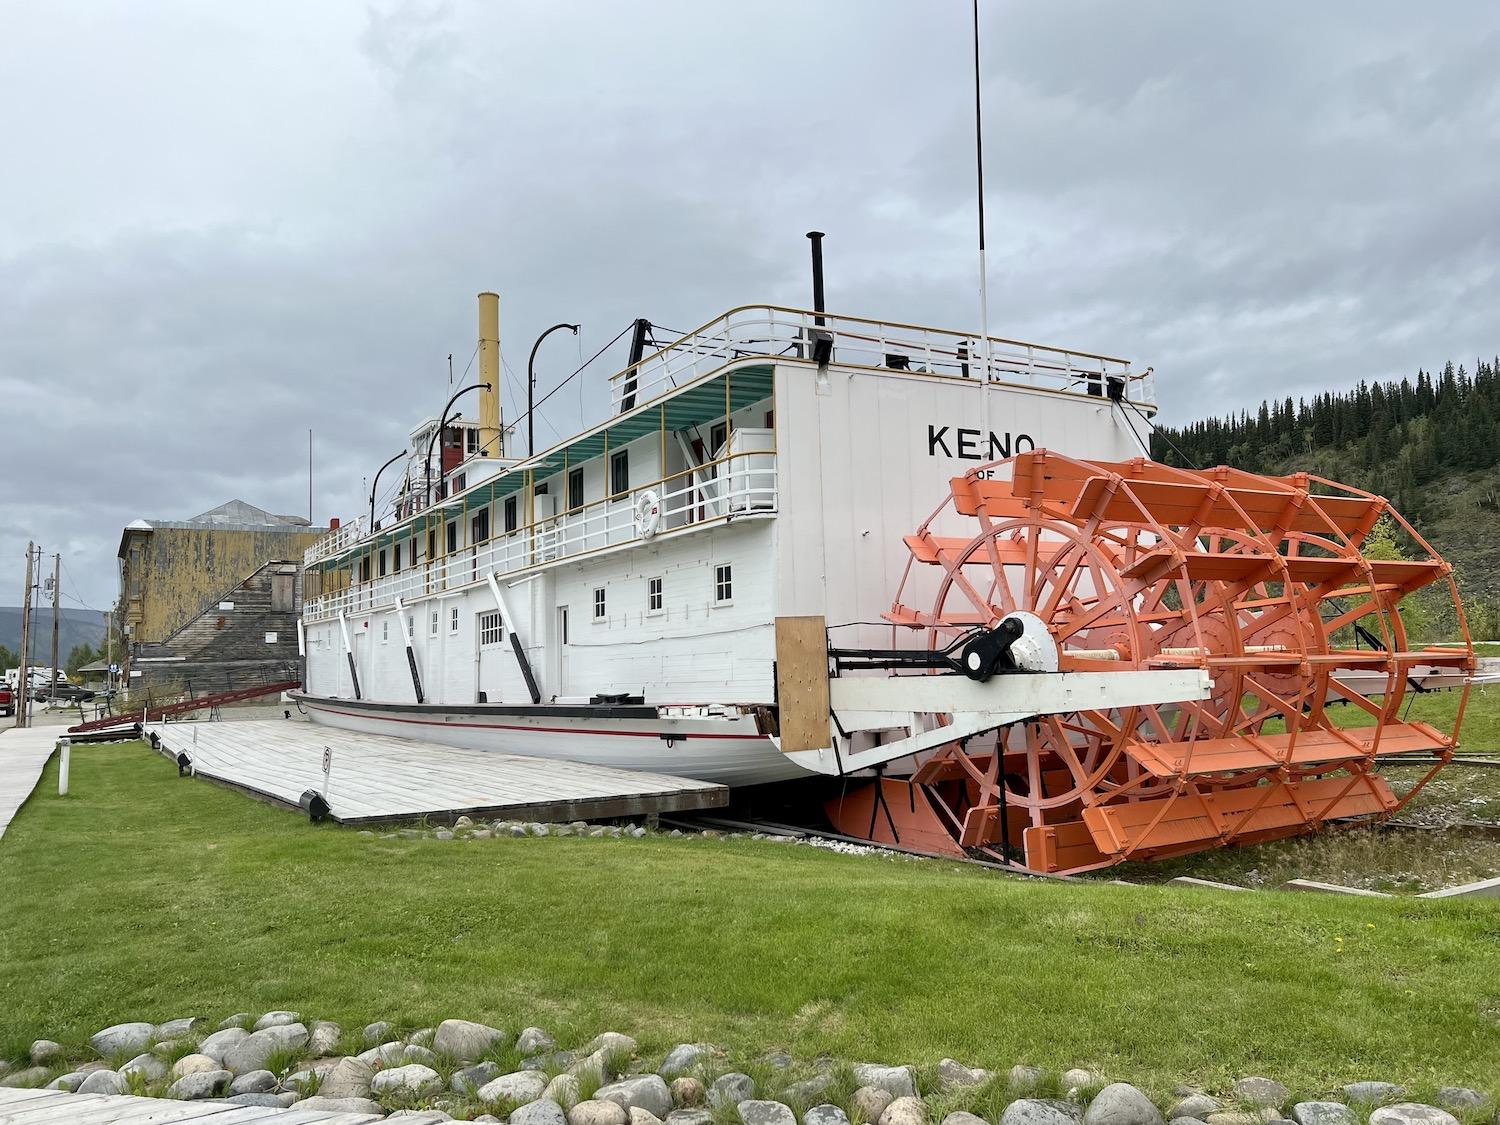 The S.S. Keno has been a fixture on the Dawson waterfront since 1960.